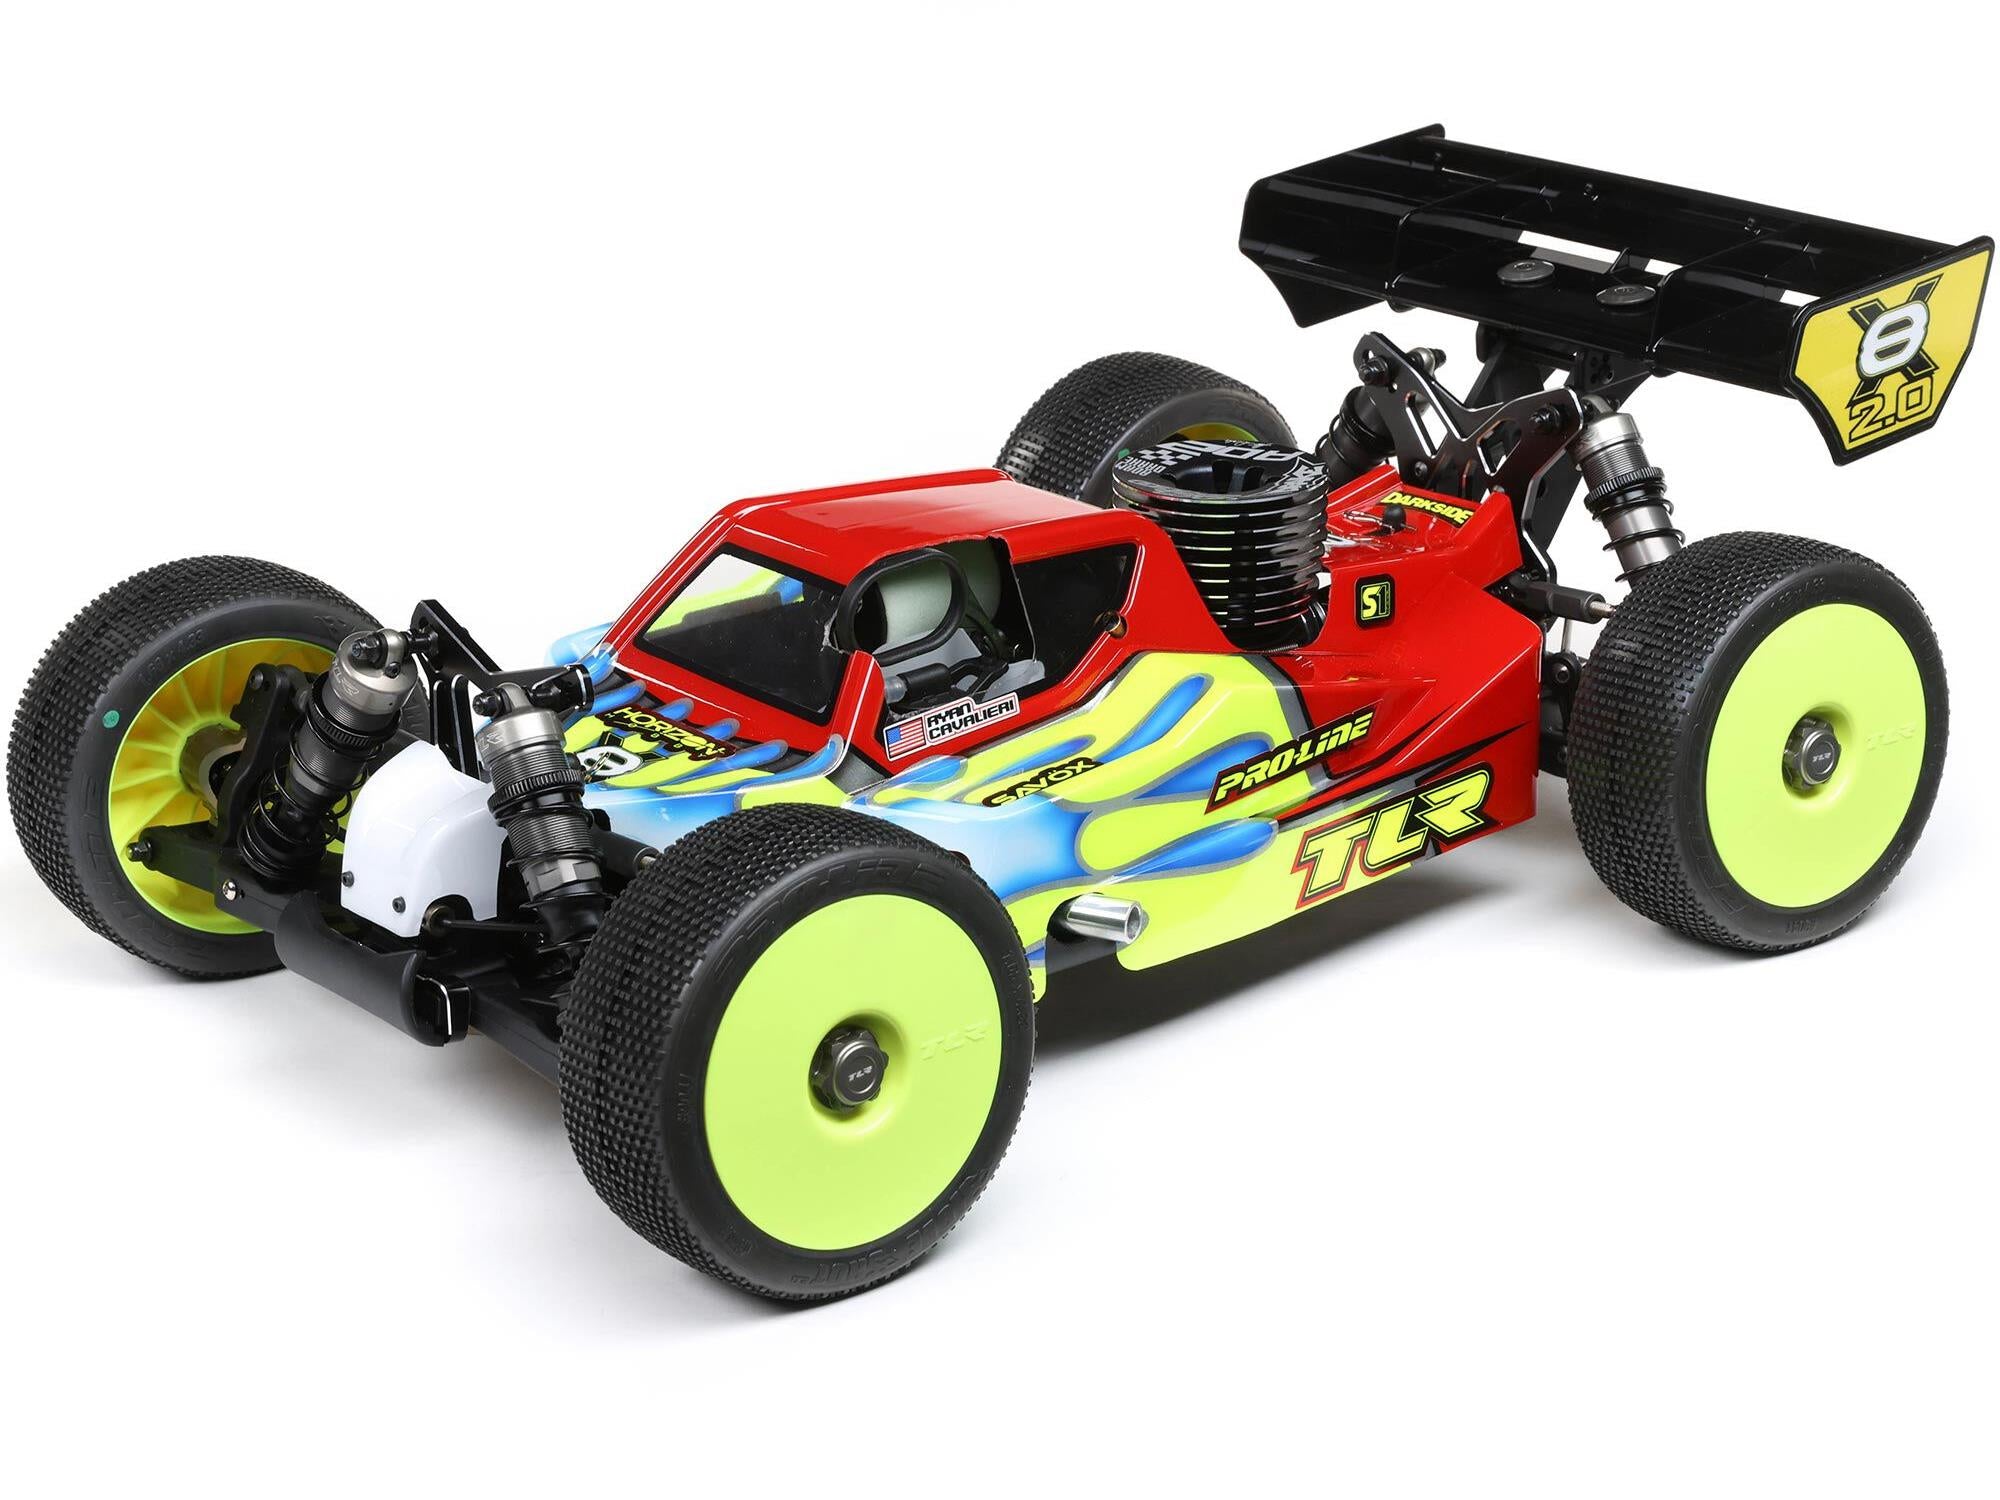 TLR 1/8 8IGHT-X/E 2.0 Combo 4WD Nitro/Electric Race Buggy Kit TLR04012